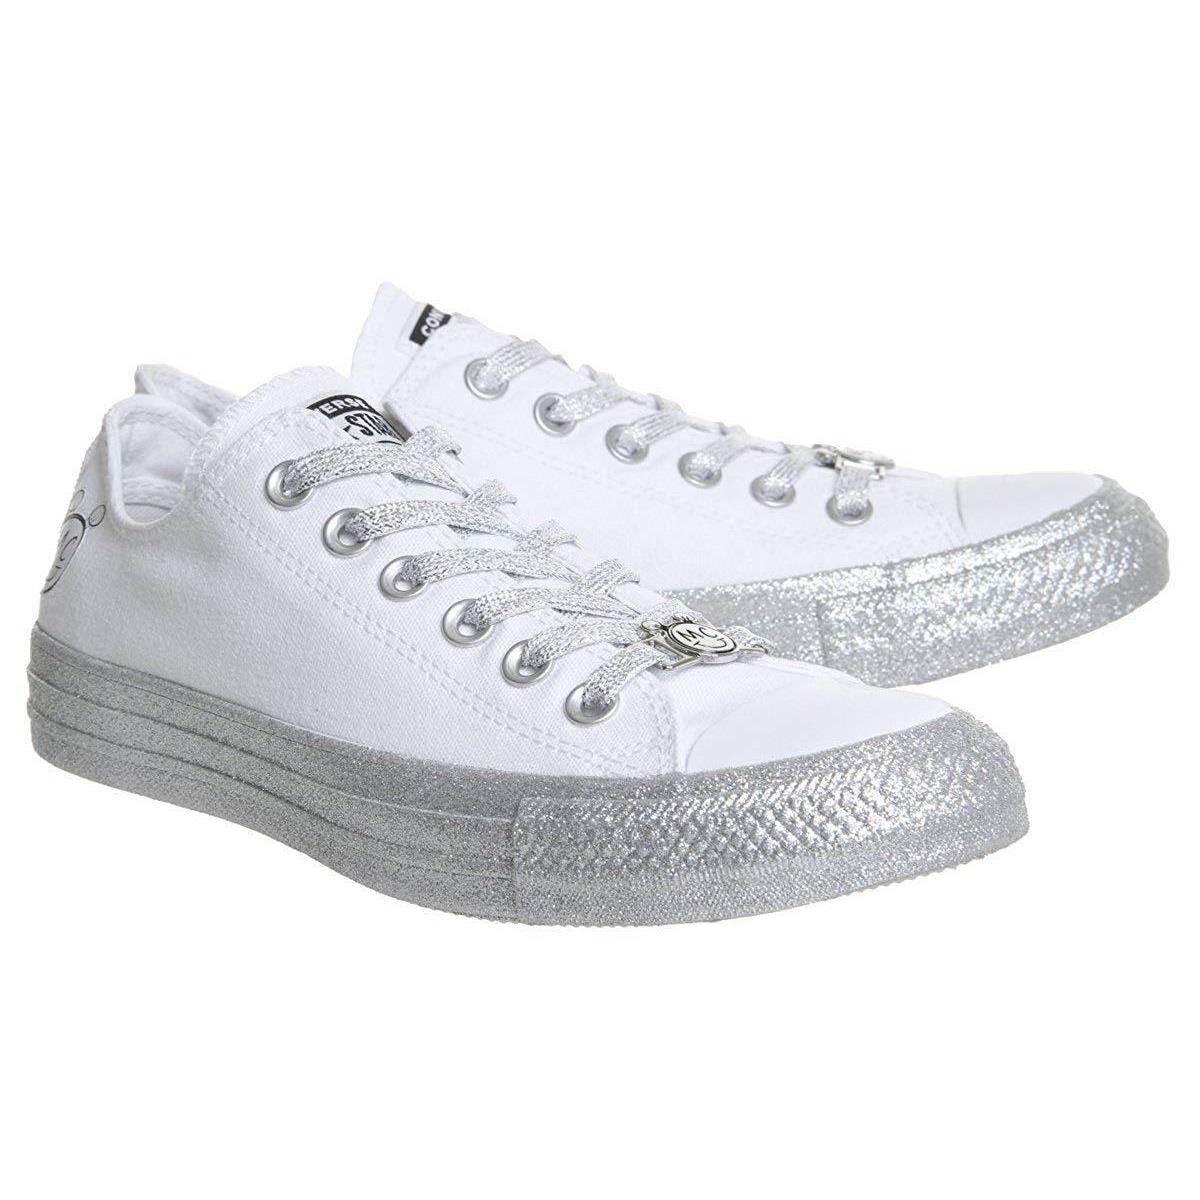 Converse Chuck Taylor All Star Miley Cyrus Sneaker White Platinum Shoe Size 10